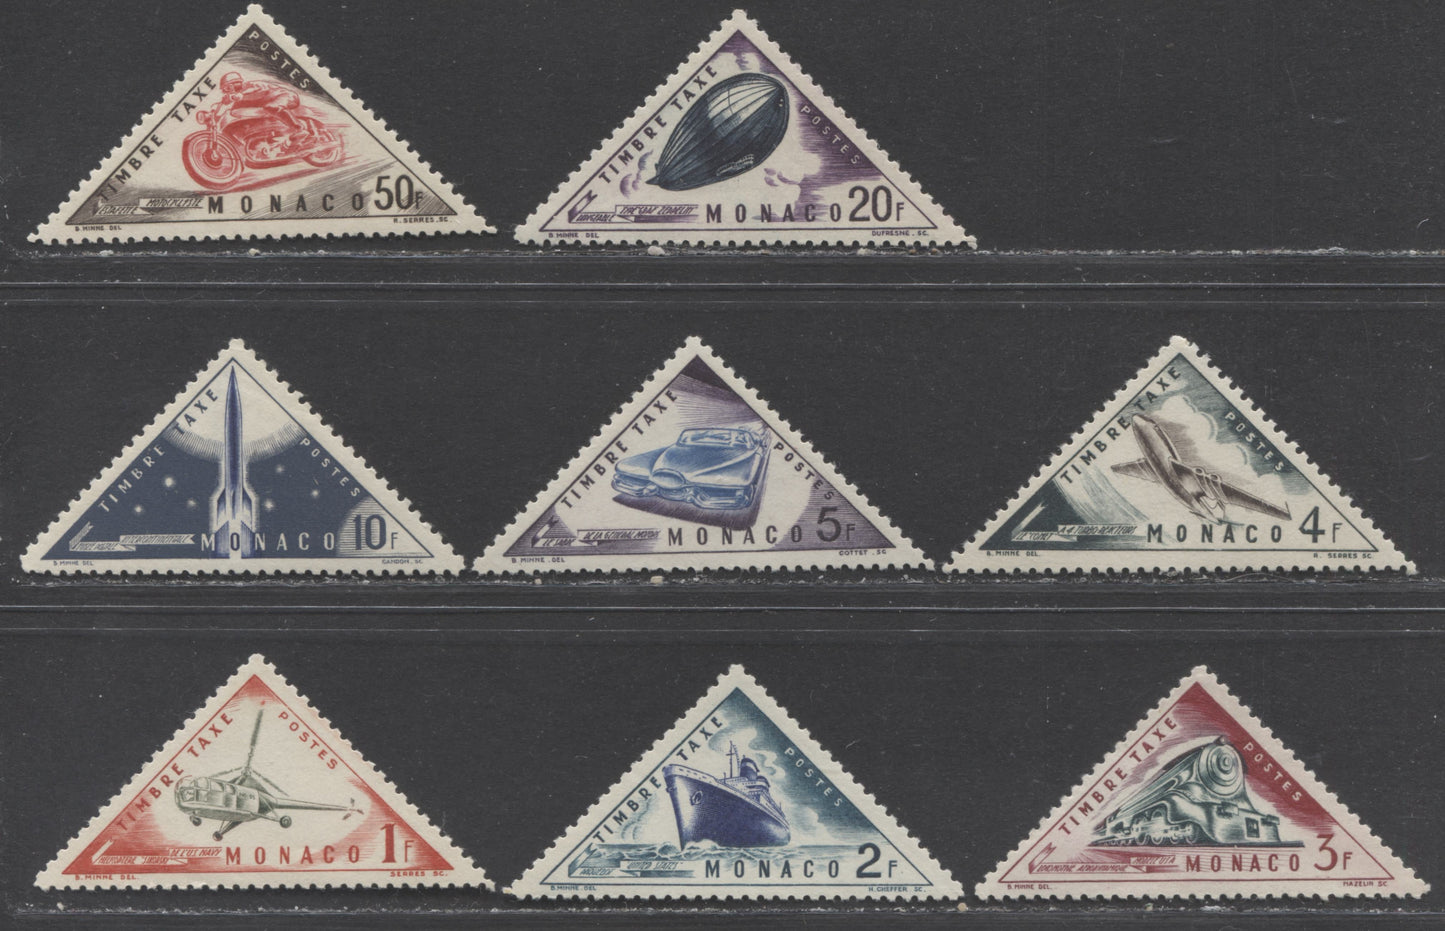 Lot 135 Monaco SC#J39-J46 1953-1954 Postage Dues, A VFOG/NH Range Of Singles, 2017 Scott Cat. $19.6 USD, Click on Listing to See ALL Pictures